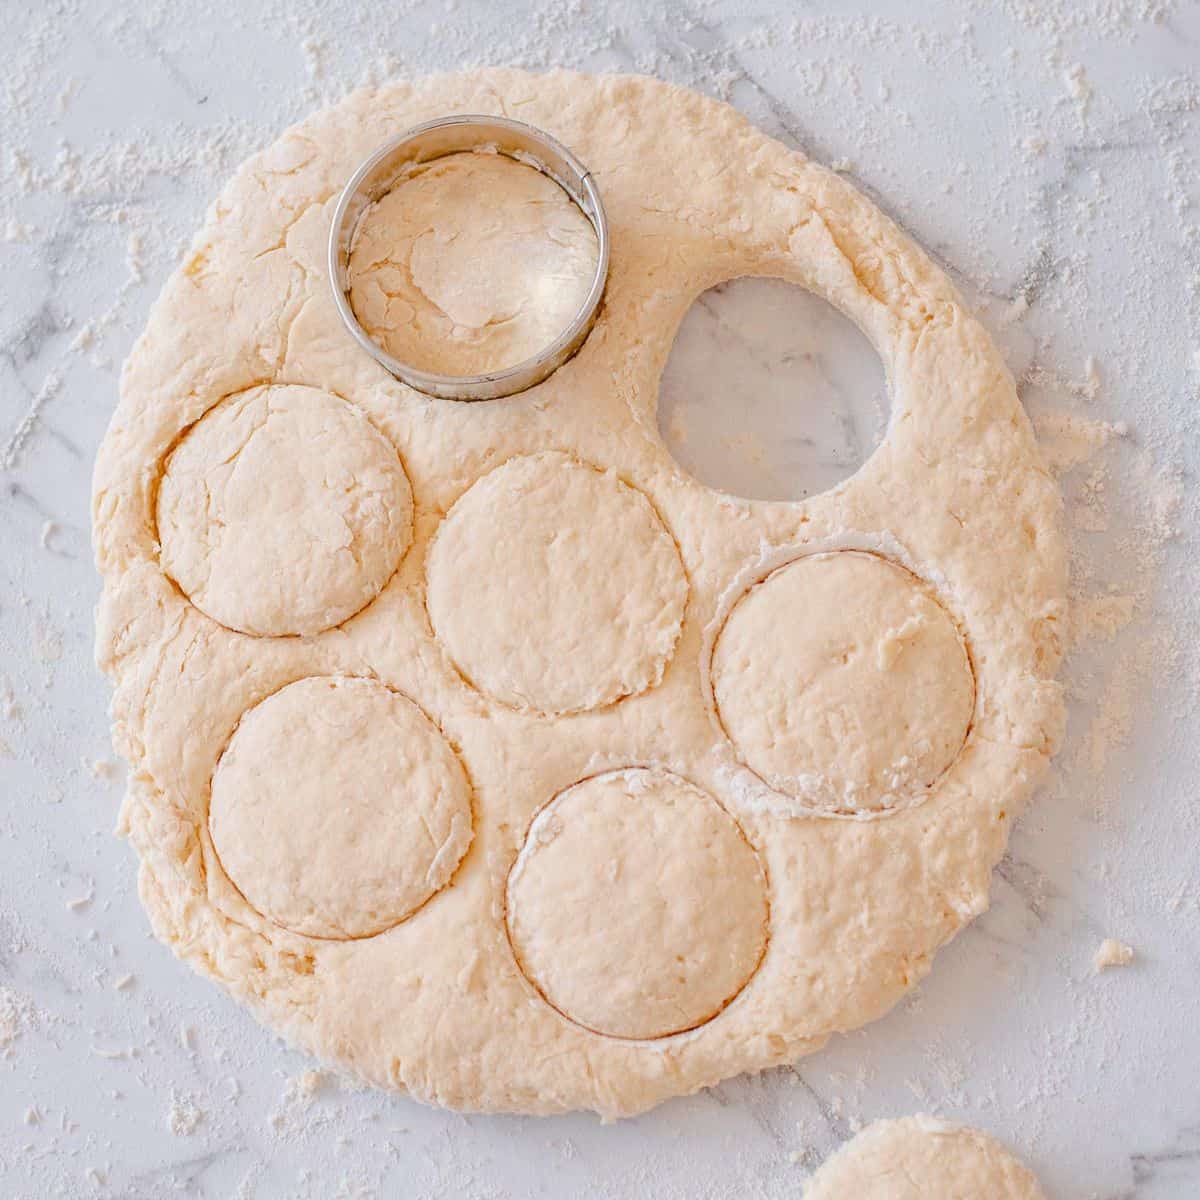 Scone dough rolled out with circles cut with a cutter.